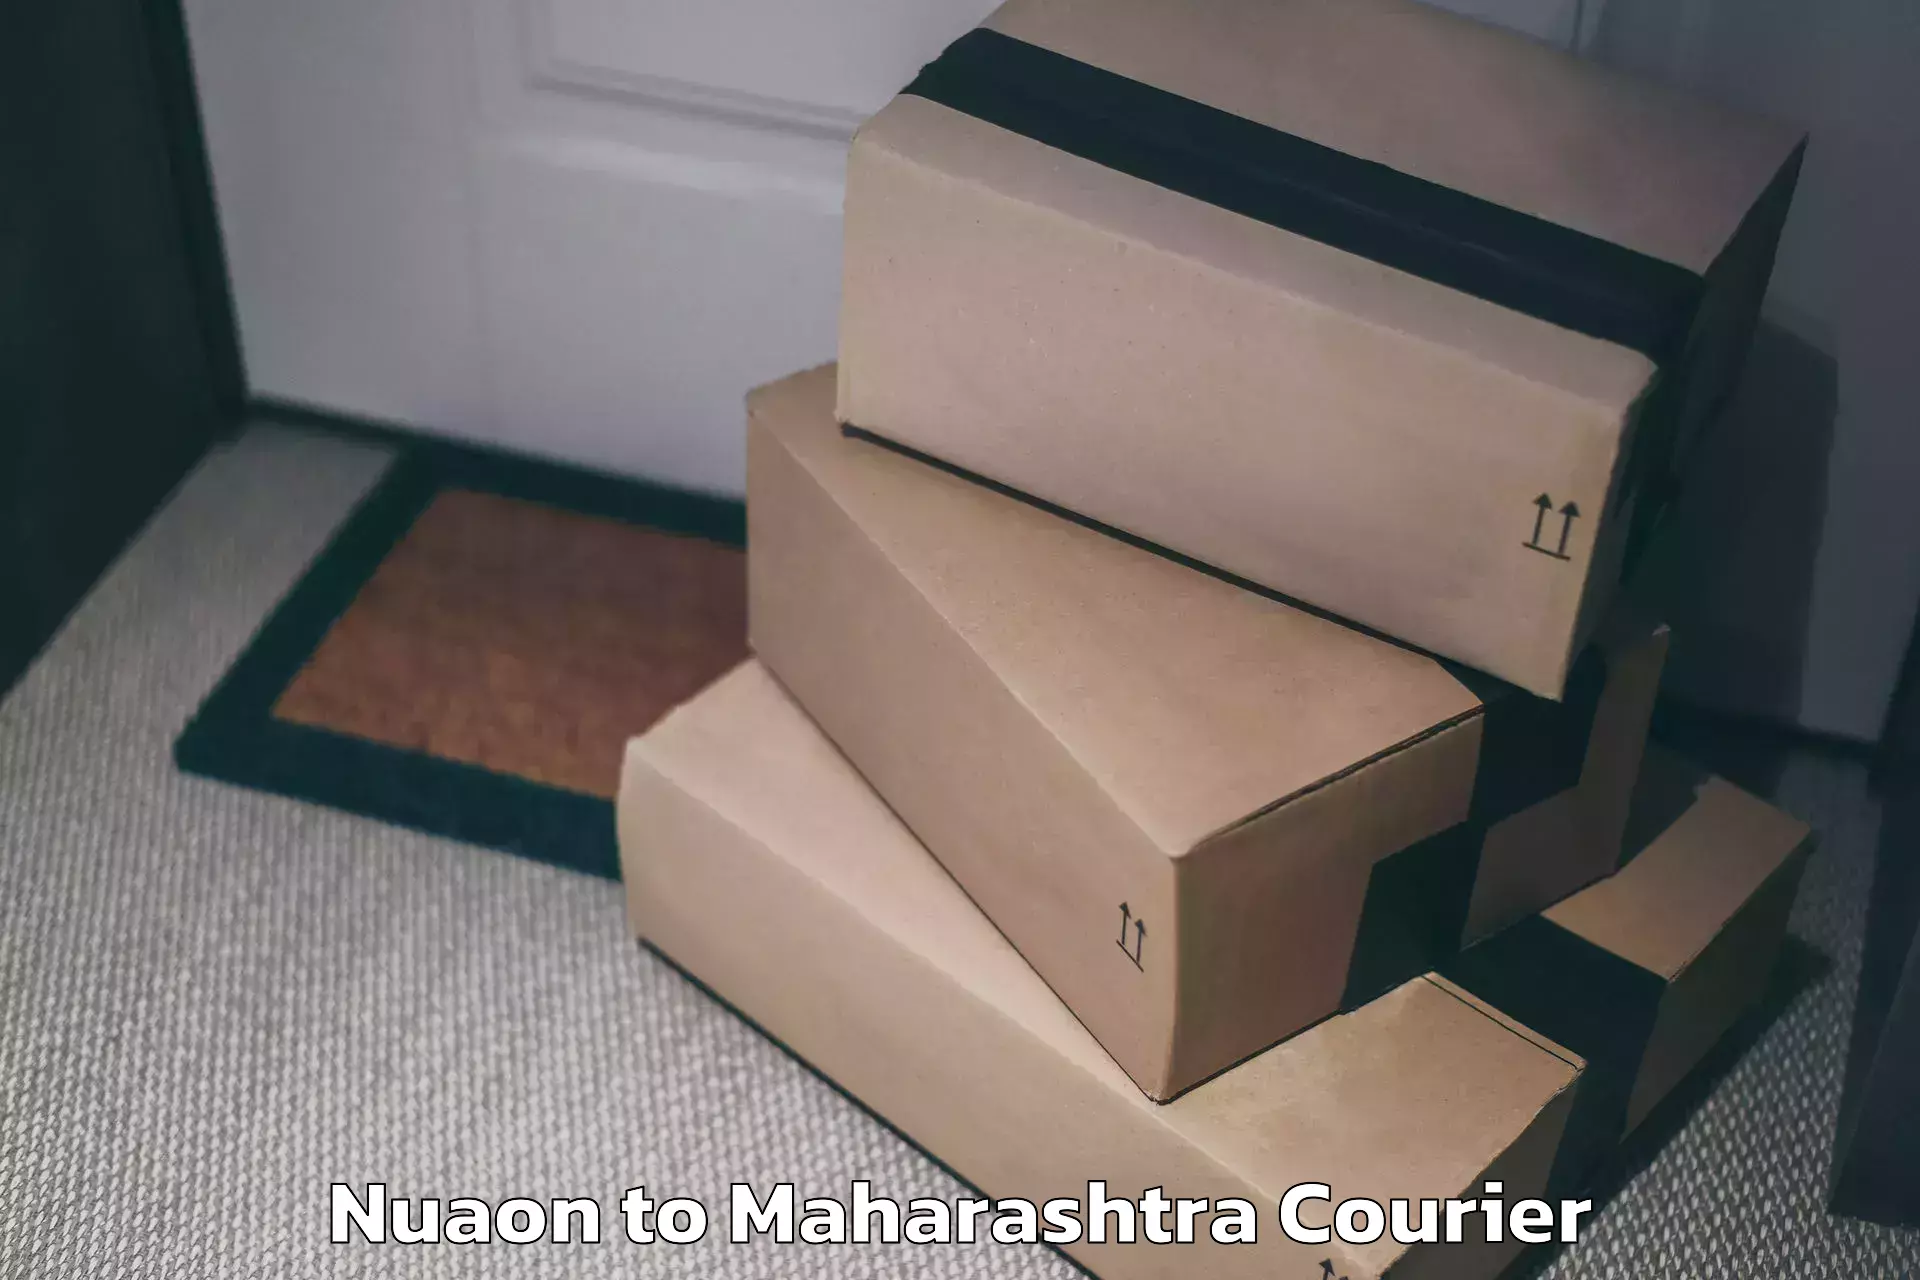 Luggage storage and delivery in Nuaon to Andheri